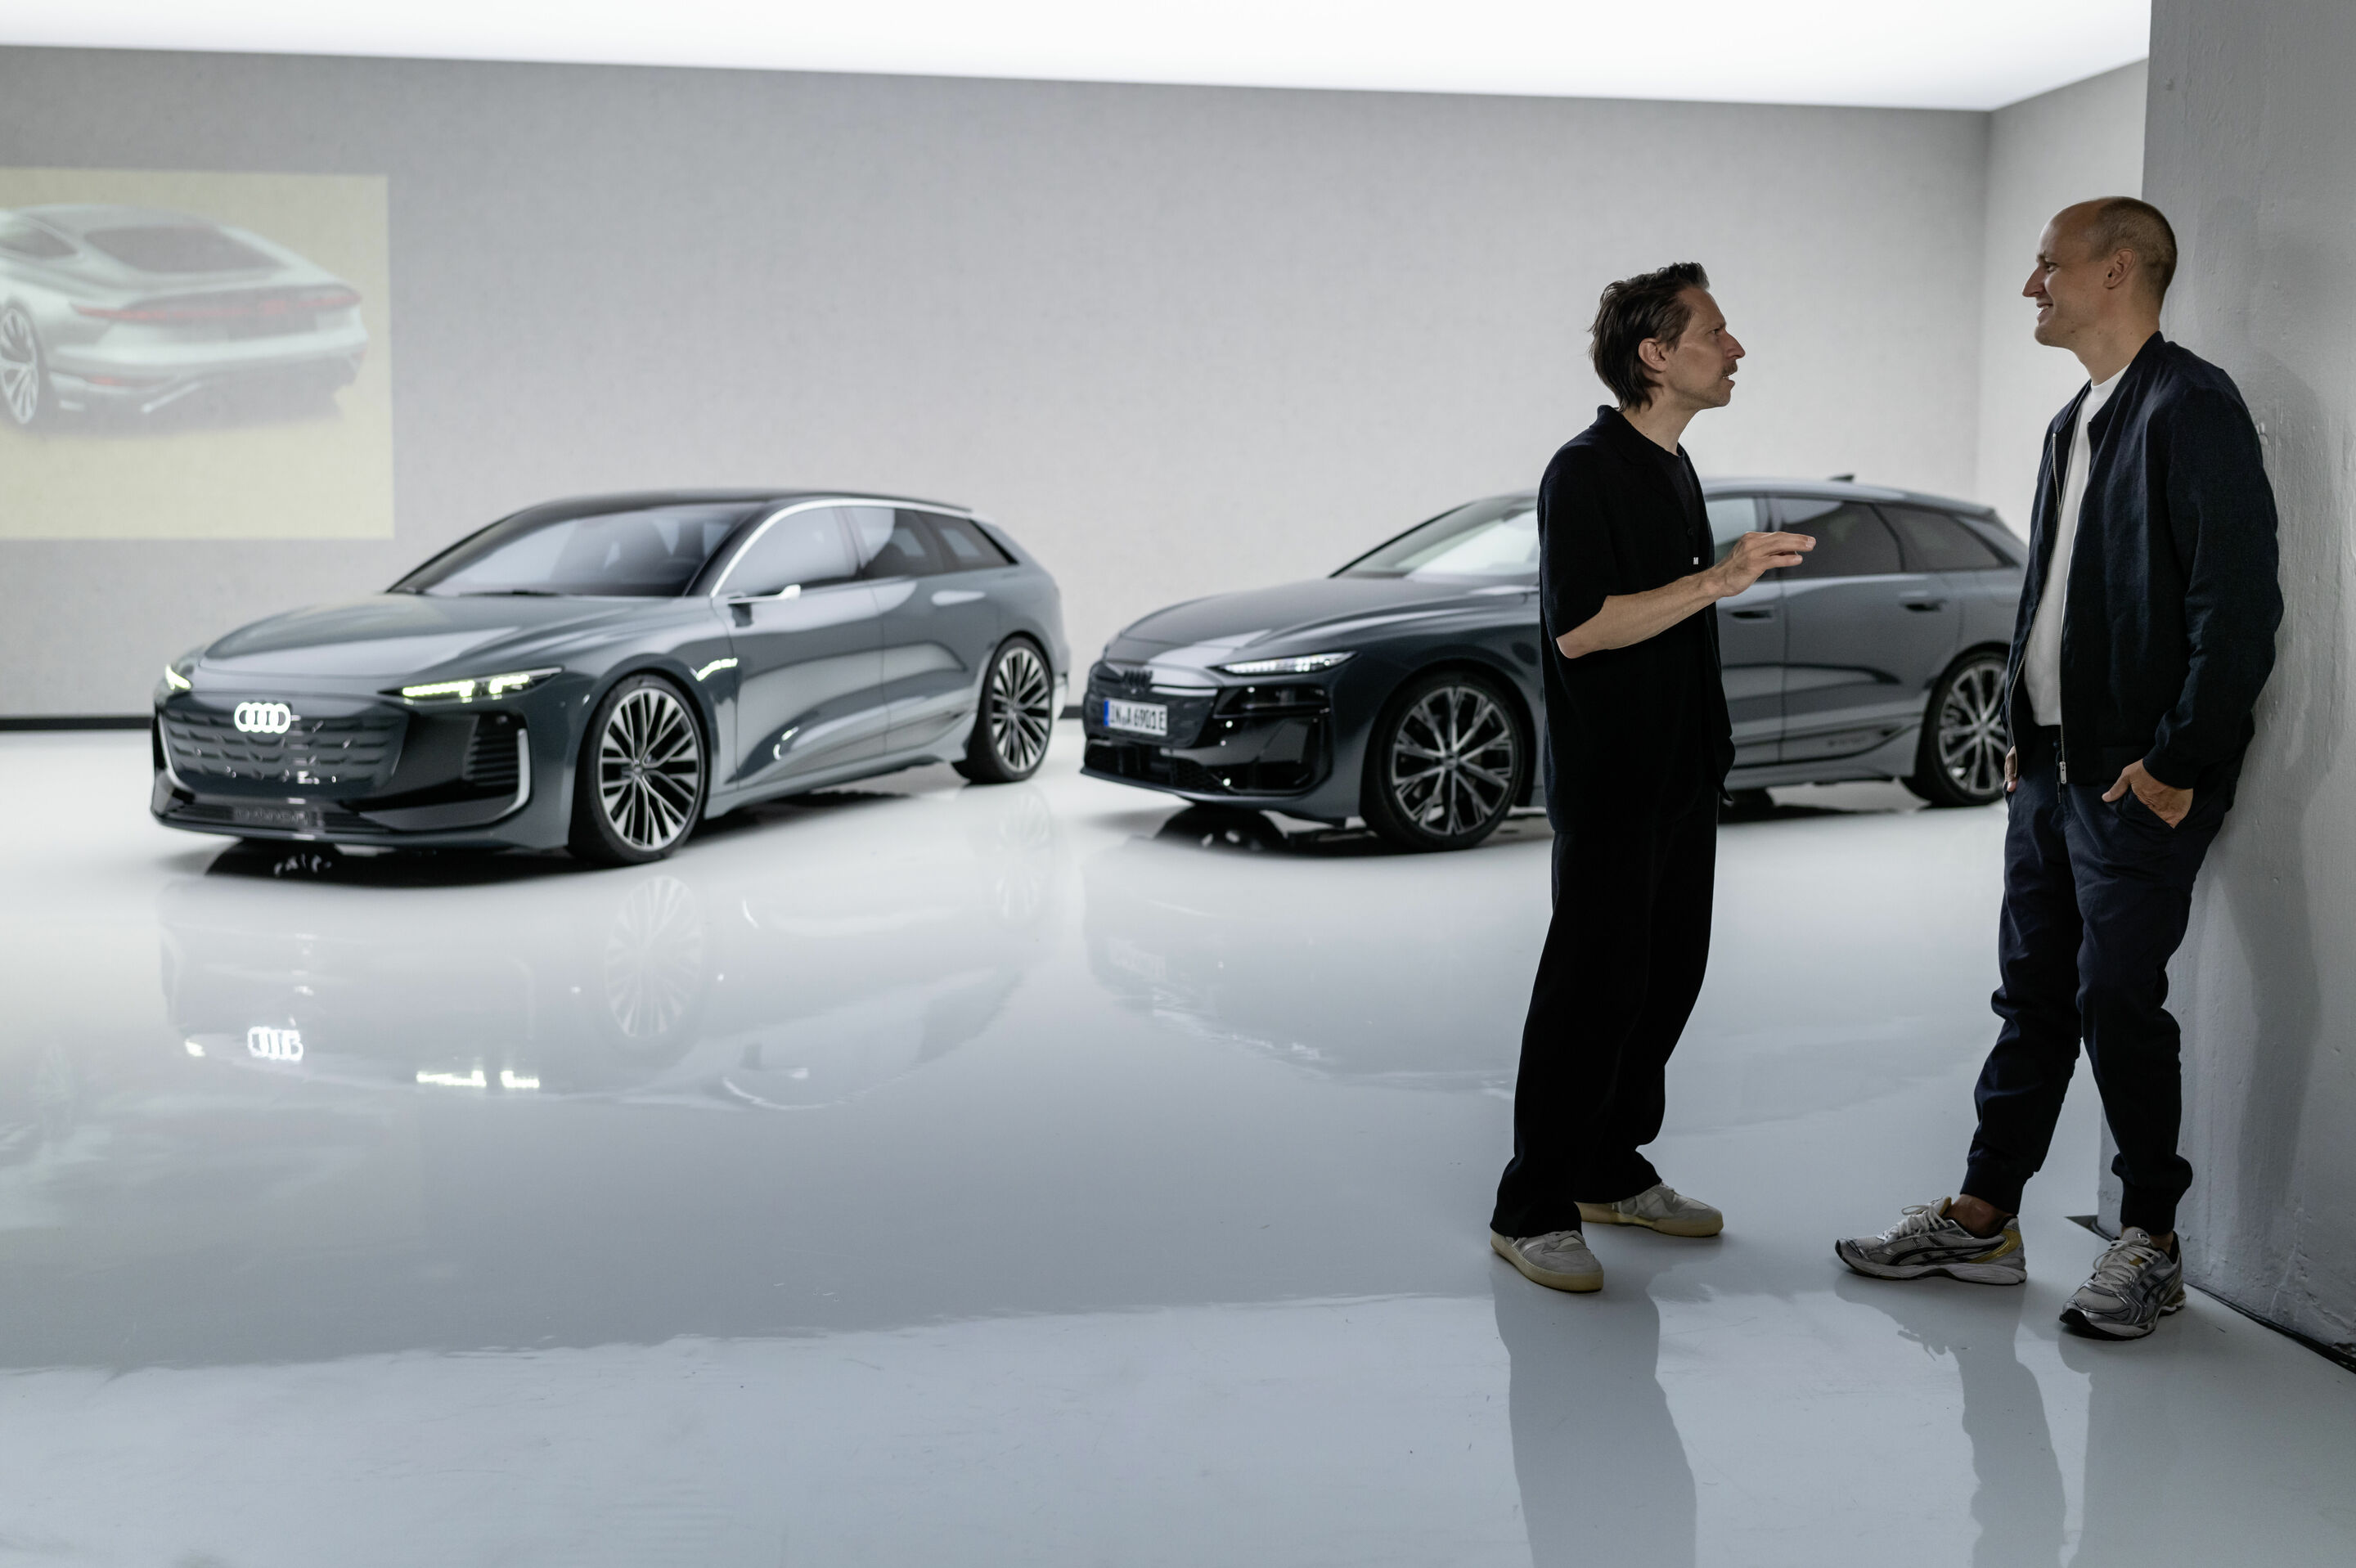 Audi A6 e-tron: As exciting as the show car